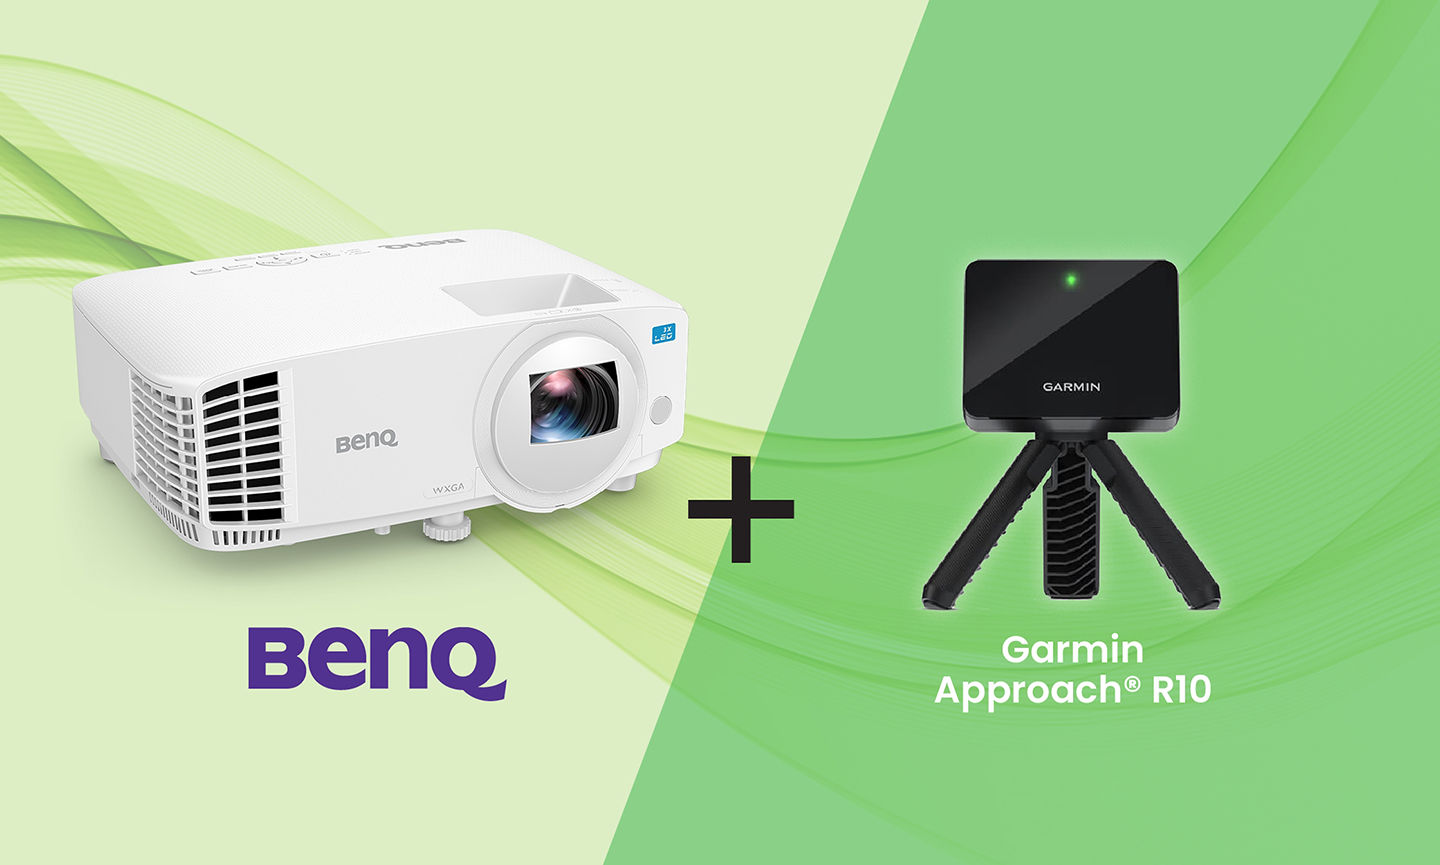 What are the Best Projectors for the Garmin Approach R10 in a Home